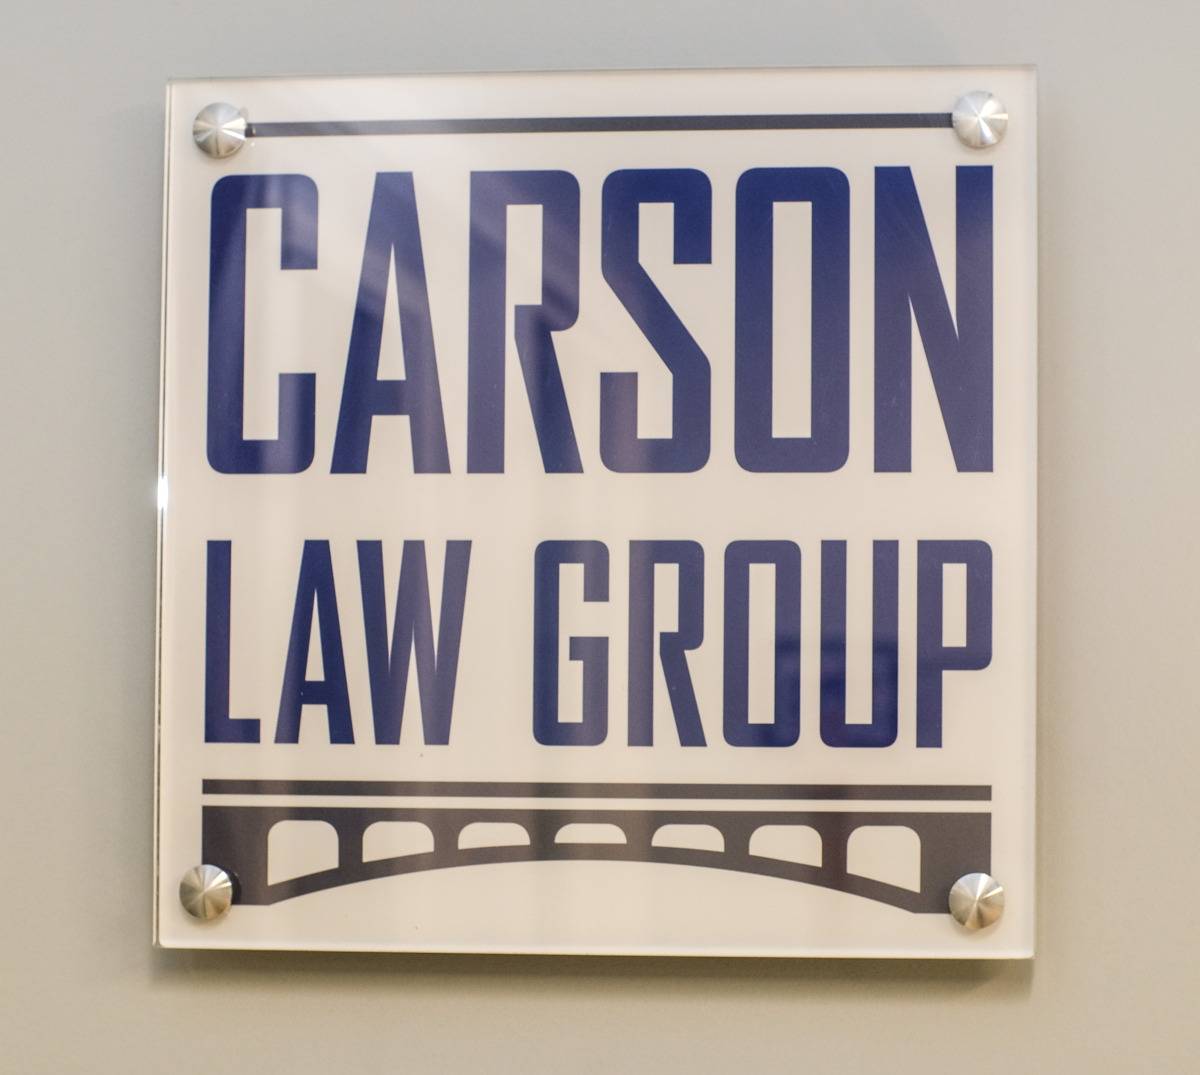 Read more about the article Carson Law named Best Firm by U.S. News, C-L